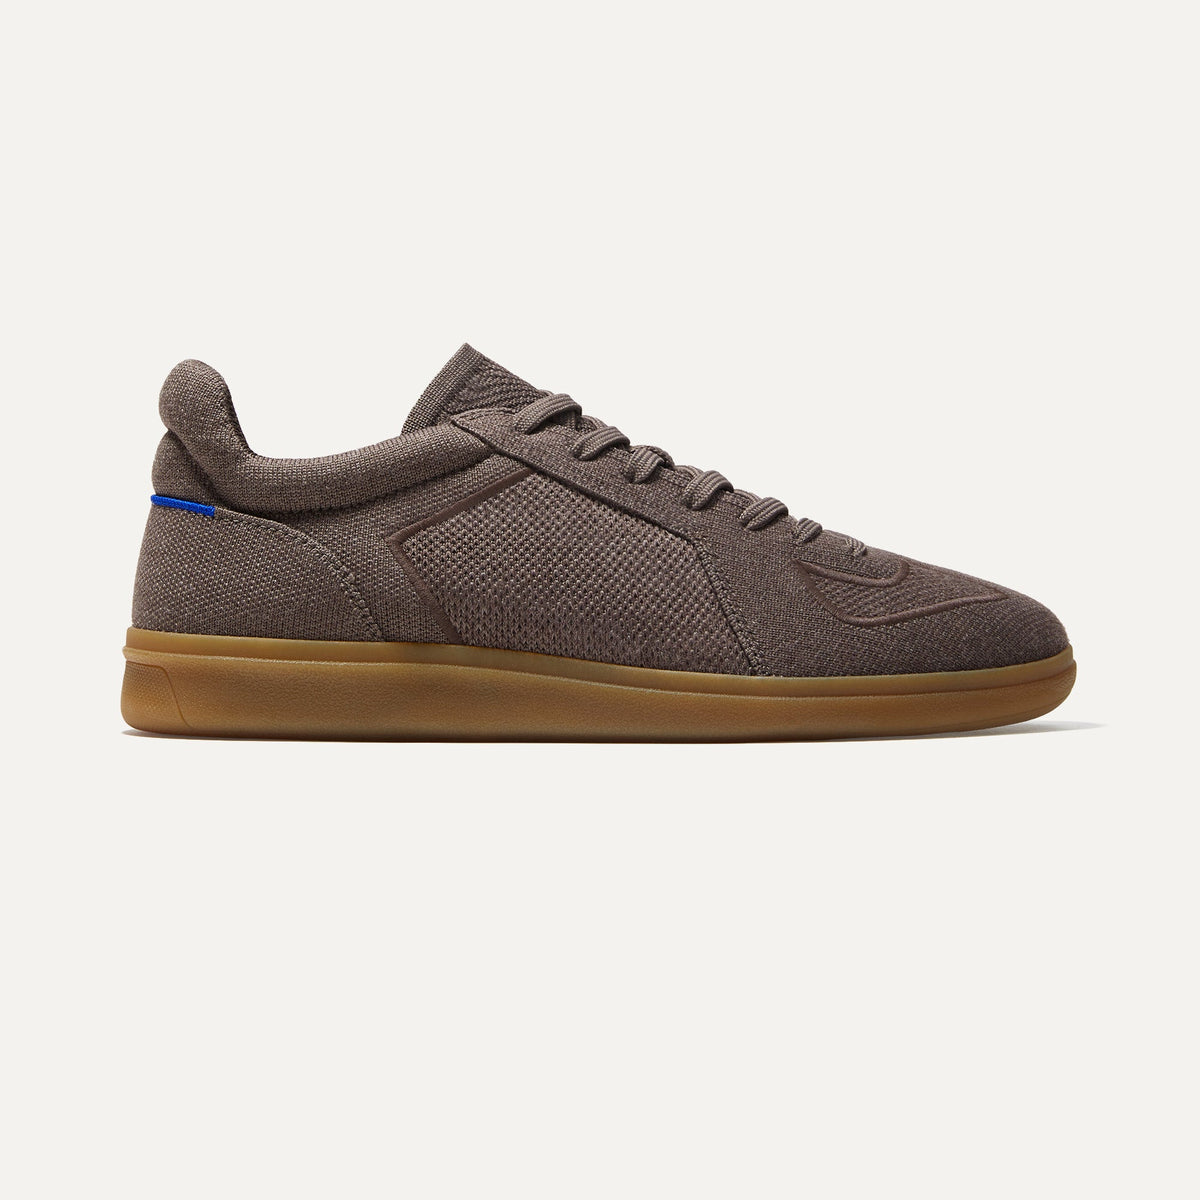 The Merino RS01 Sneaker in Timber Brown | Men’s Tennis Shoes | Rothy's